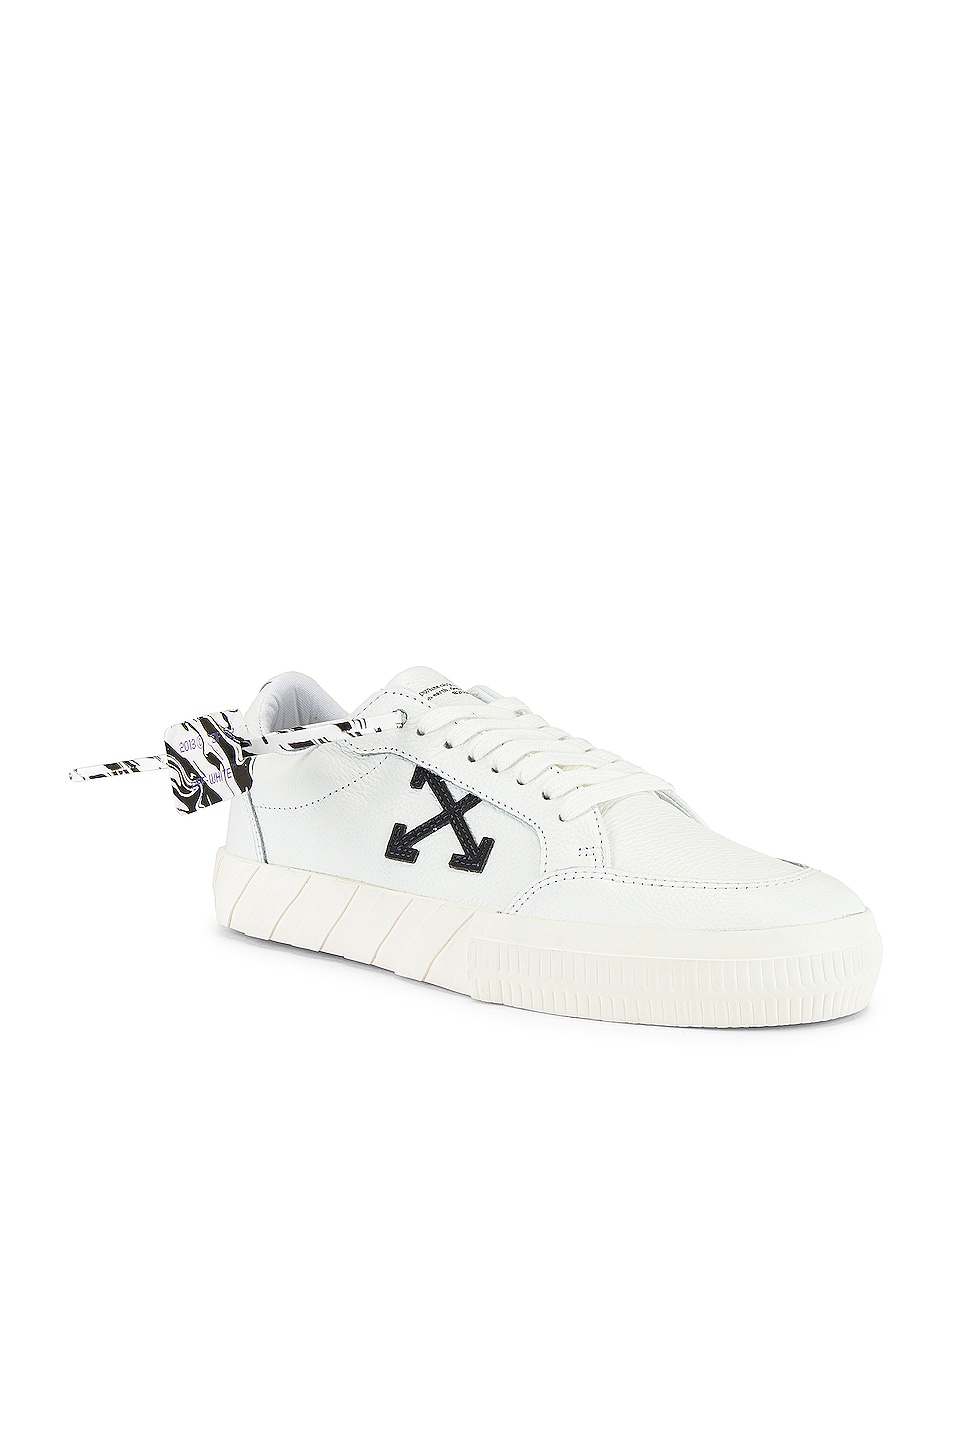 Image 1 of OFF-WHITE Low Vulcanized Sneaker in Leather White Iridescent